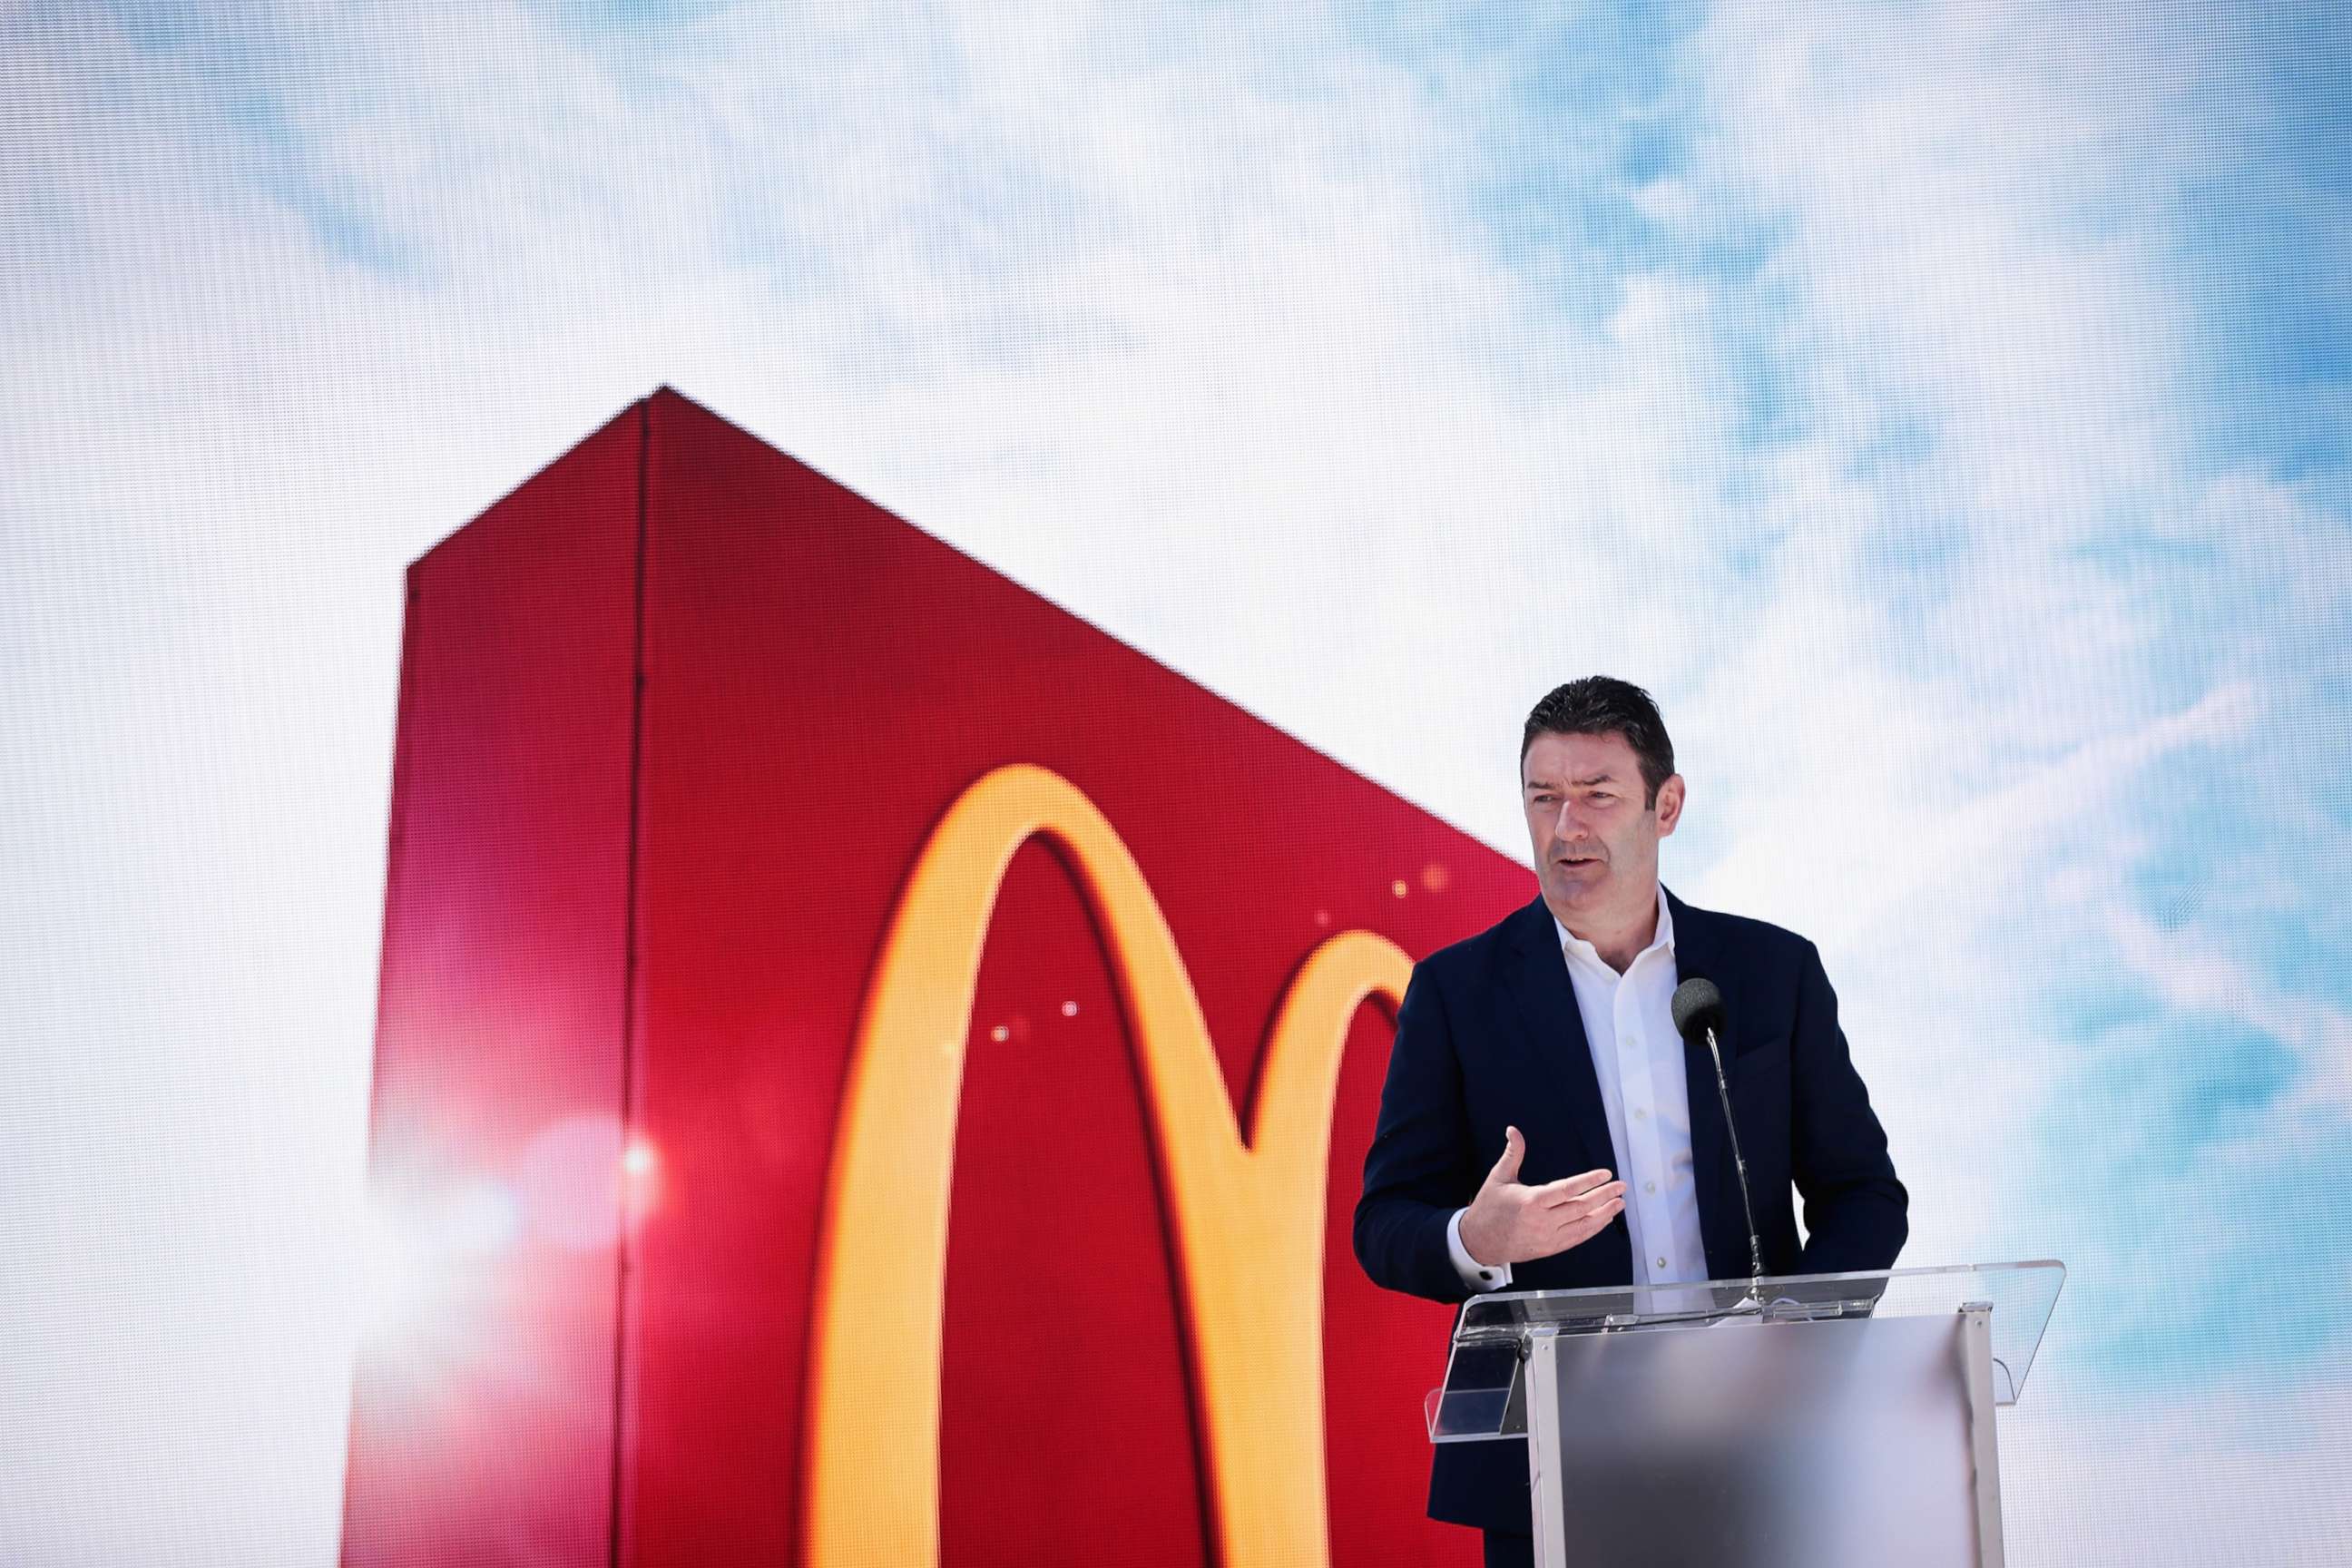 PHOTO: McDonald's CEO Stephen Easterbrook unveils the company's new corporate headquarters during a grand opening ceremony on June 4, 2018, in Chicago.